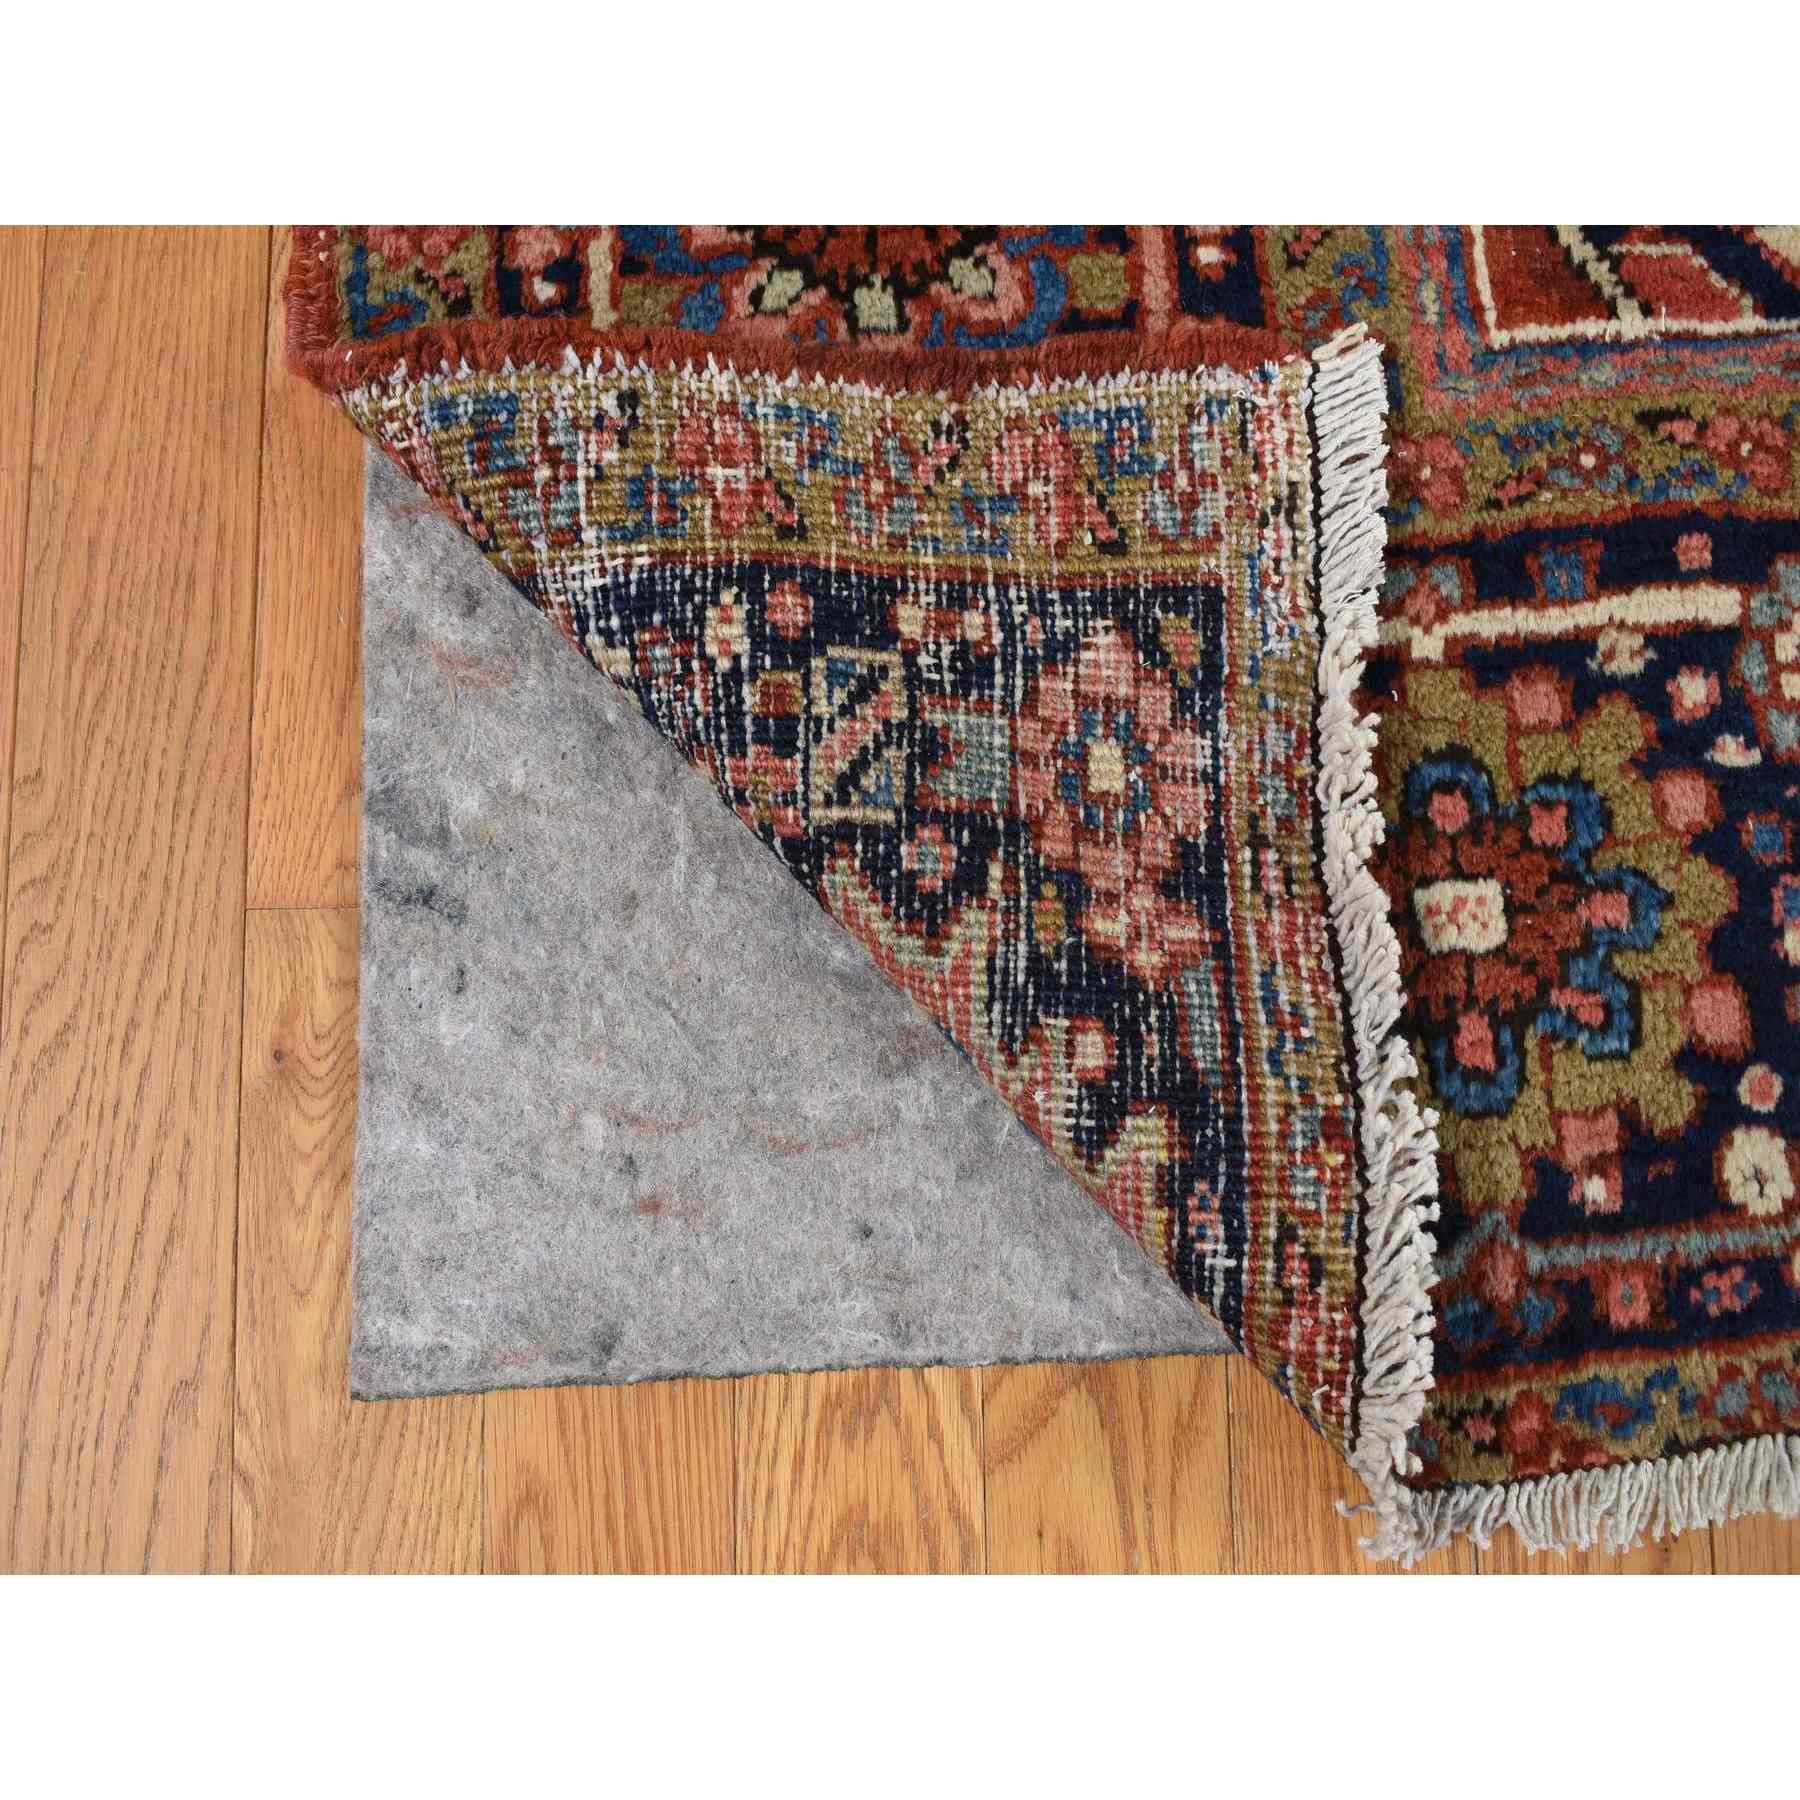 Antique-Hand-Knotted-Rug-390290